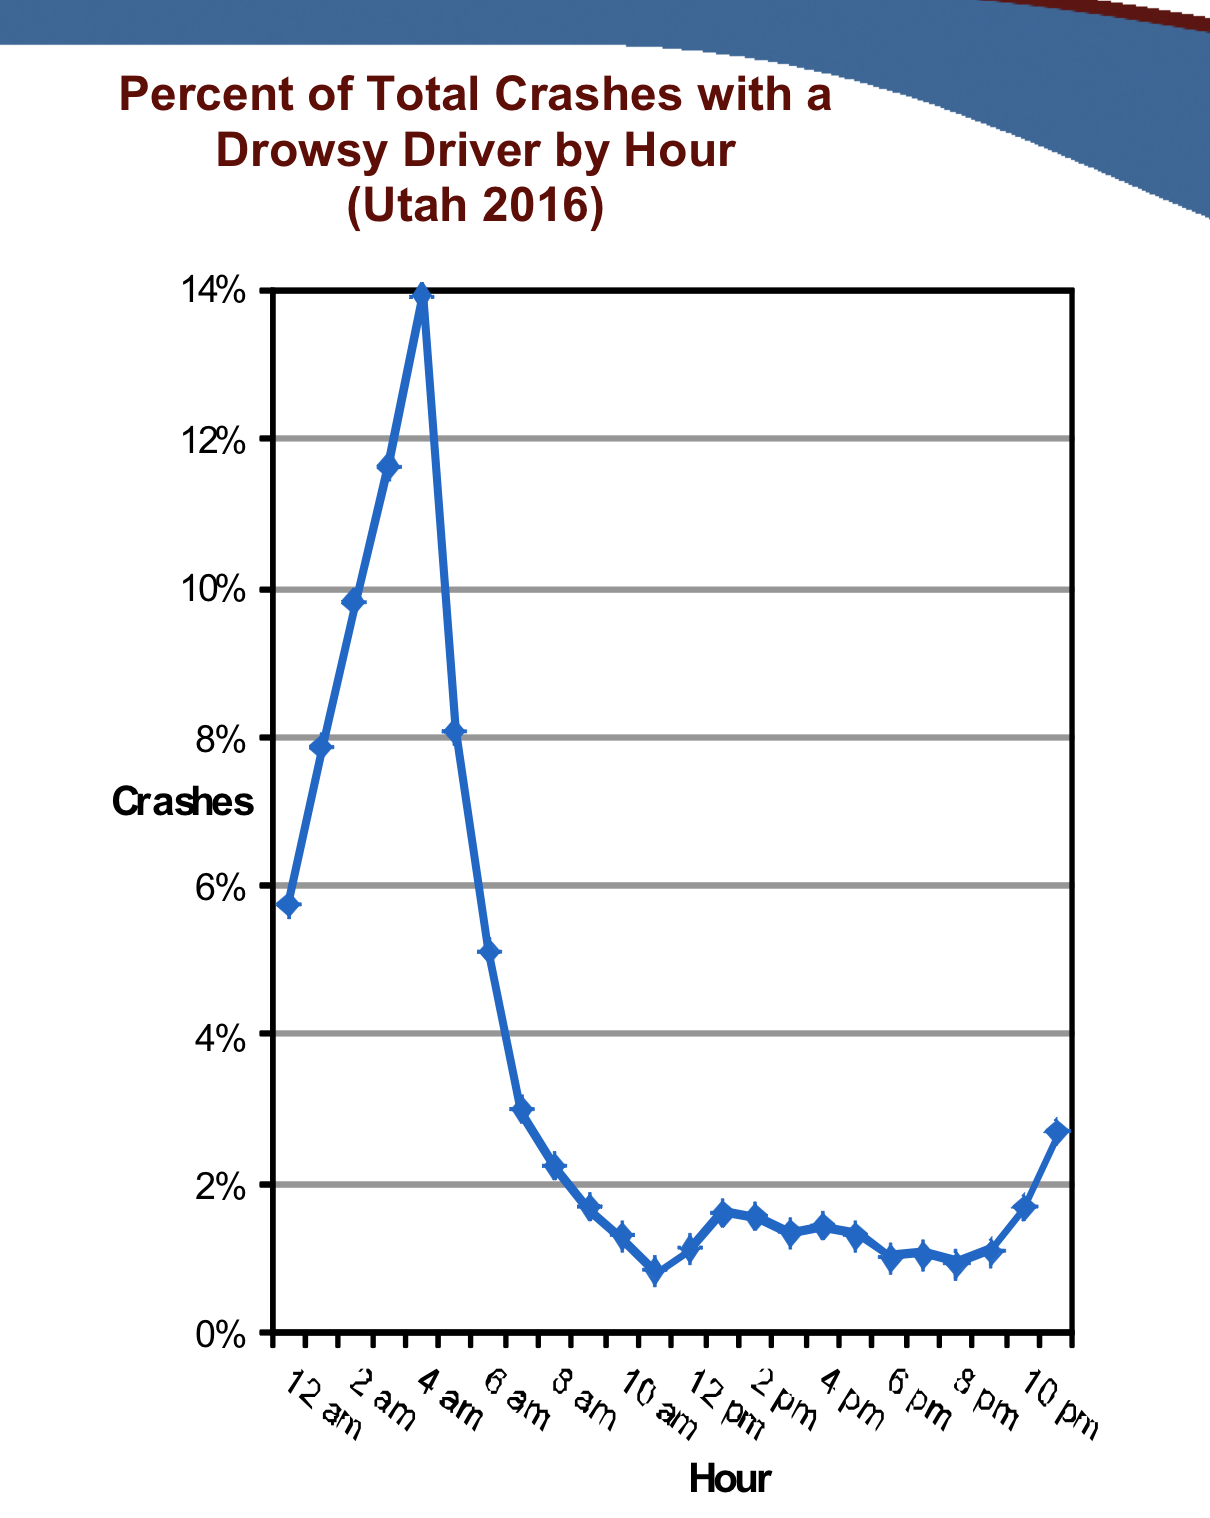 Line graph shows percent of total crashes with a drowsy driver by hour in Utah in 2016. While 2% of total crashes involved a drowsy driver, 9% of crashes occurring during the hours of midnight-5:59 a.m. involved a drowsy driver.